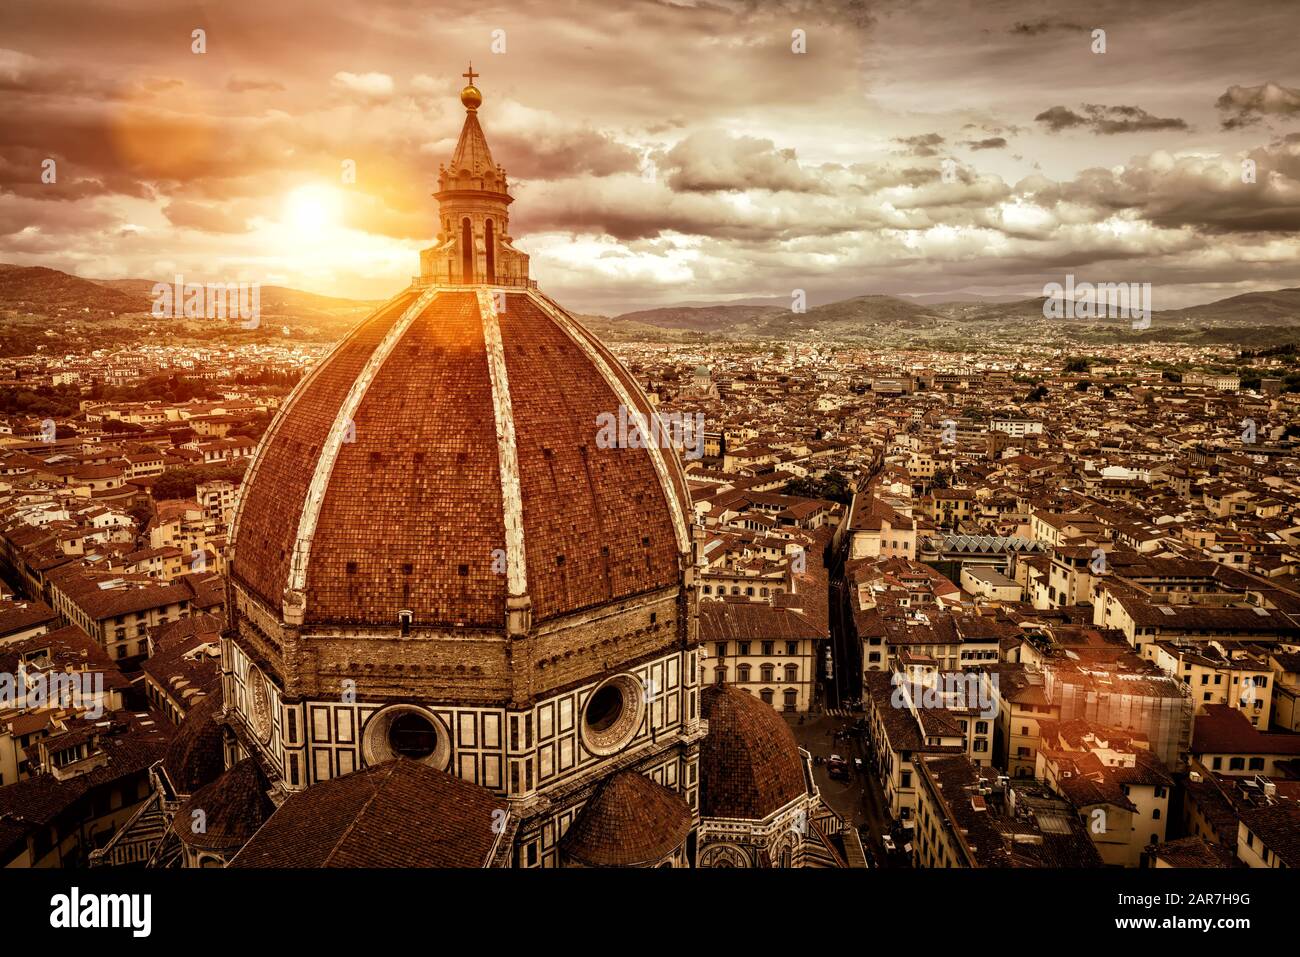 Florence skyline at suset, Italy. The Basilica di Santa Maria del Fiore in the foreground. This is the main  church and the symbol of Florence. Stock Photo